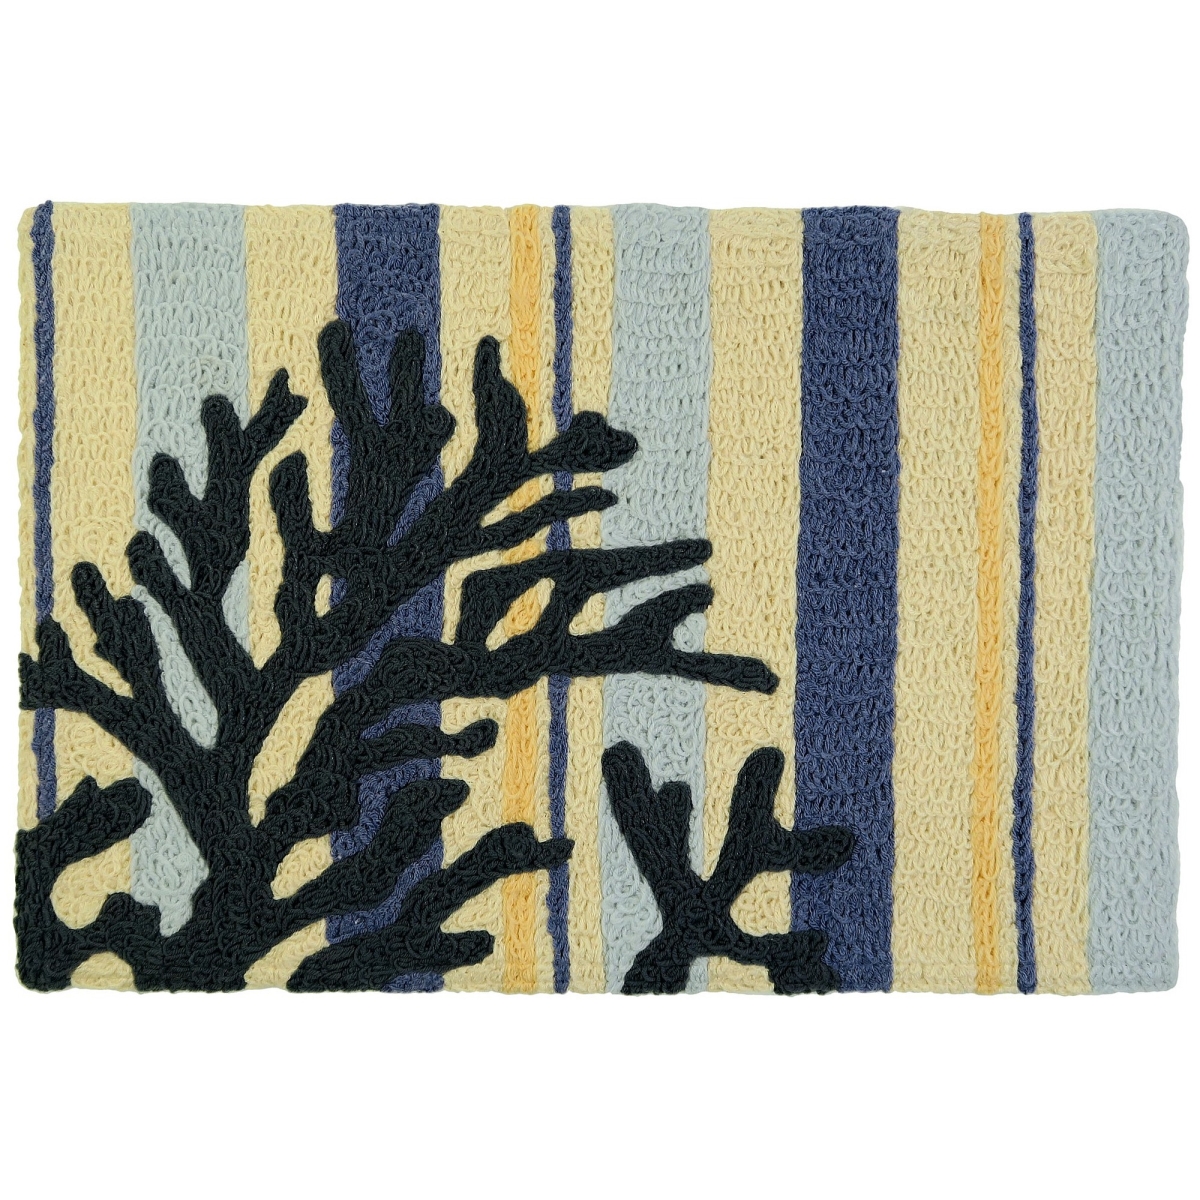 JB-AT029 20 x 30 in. Blue Coral on Weathered Boards Accent Rug -  Jellybean